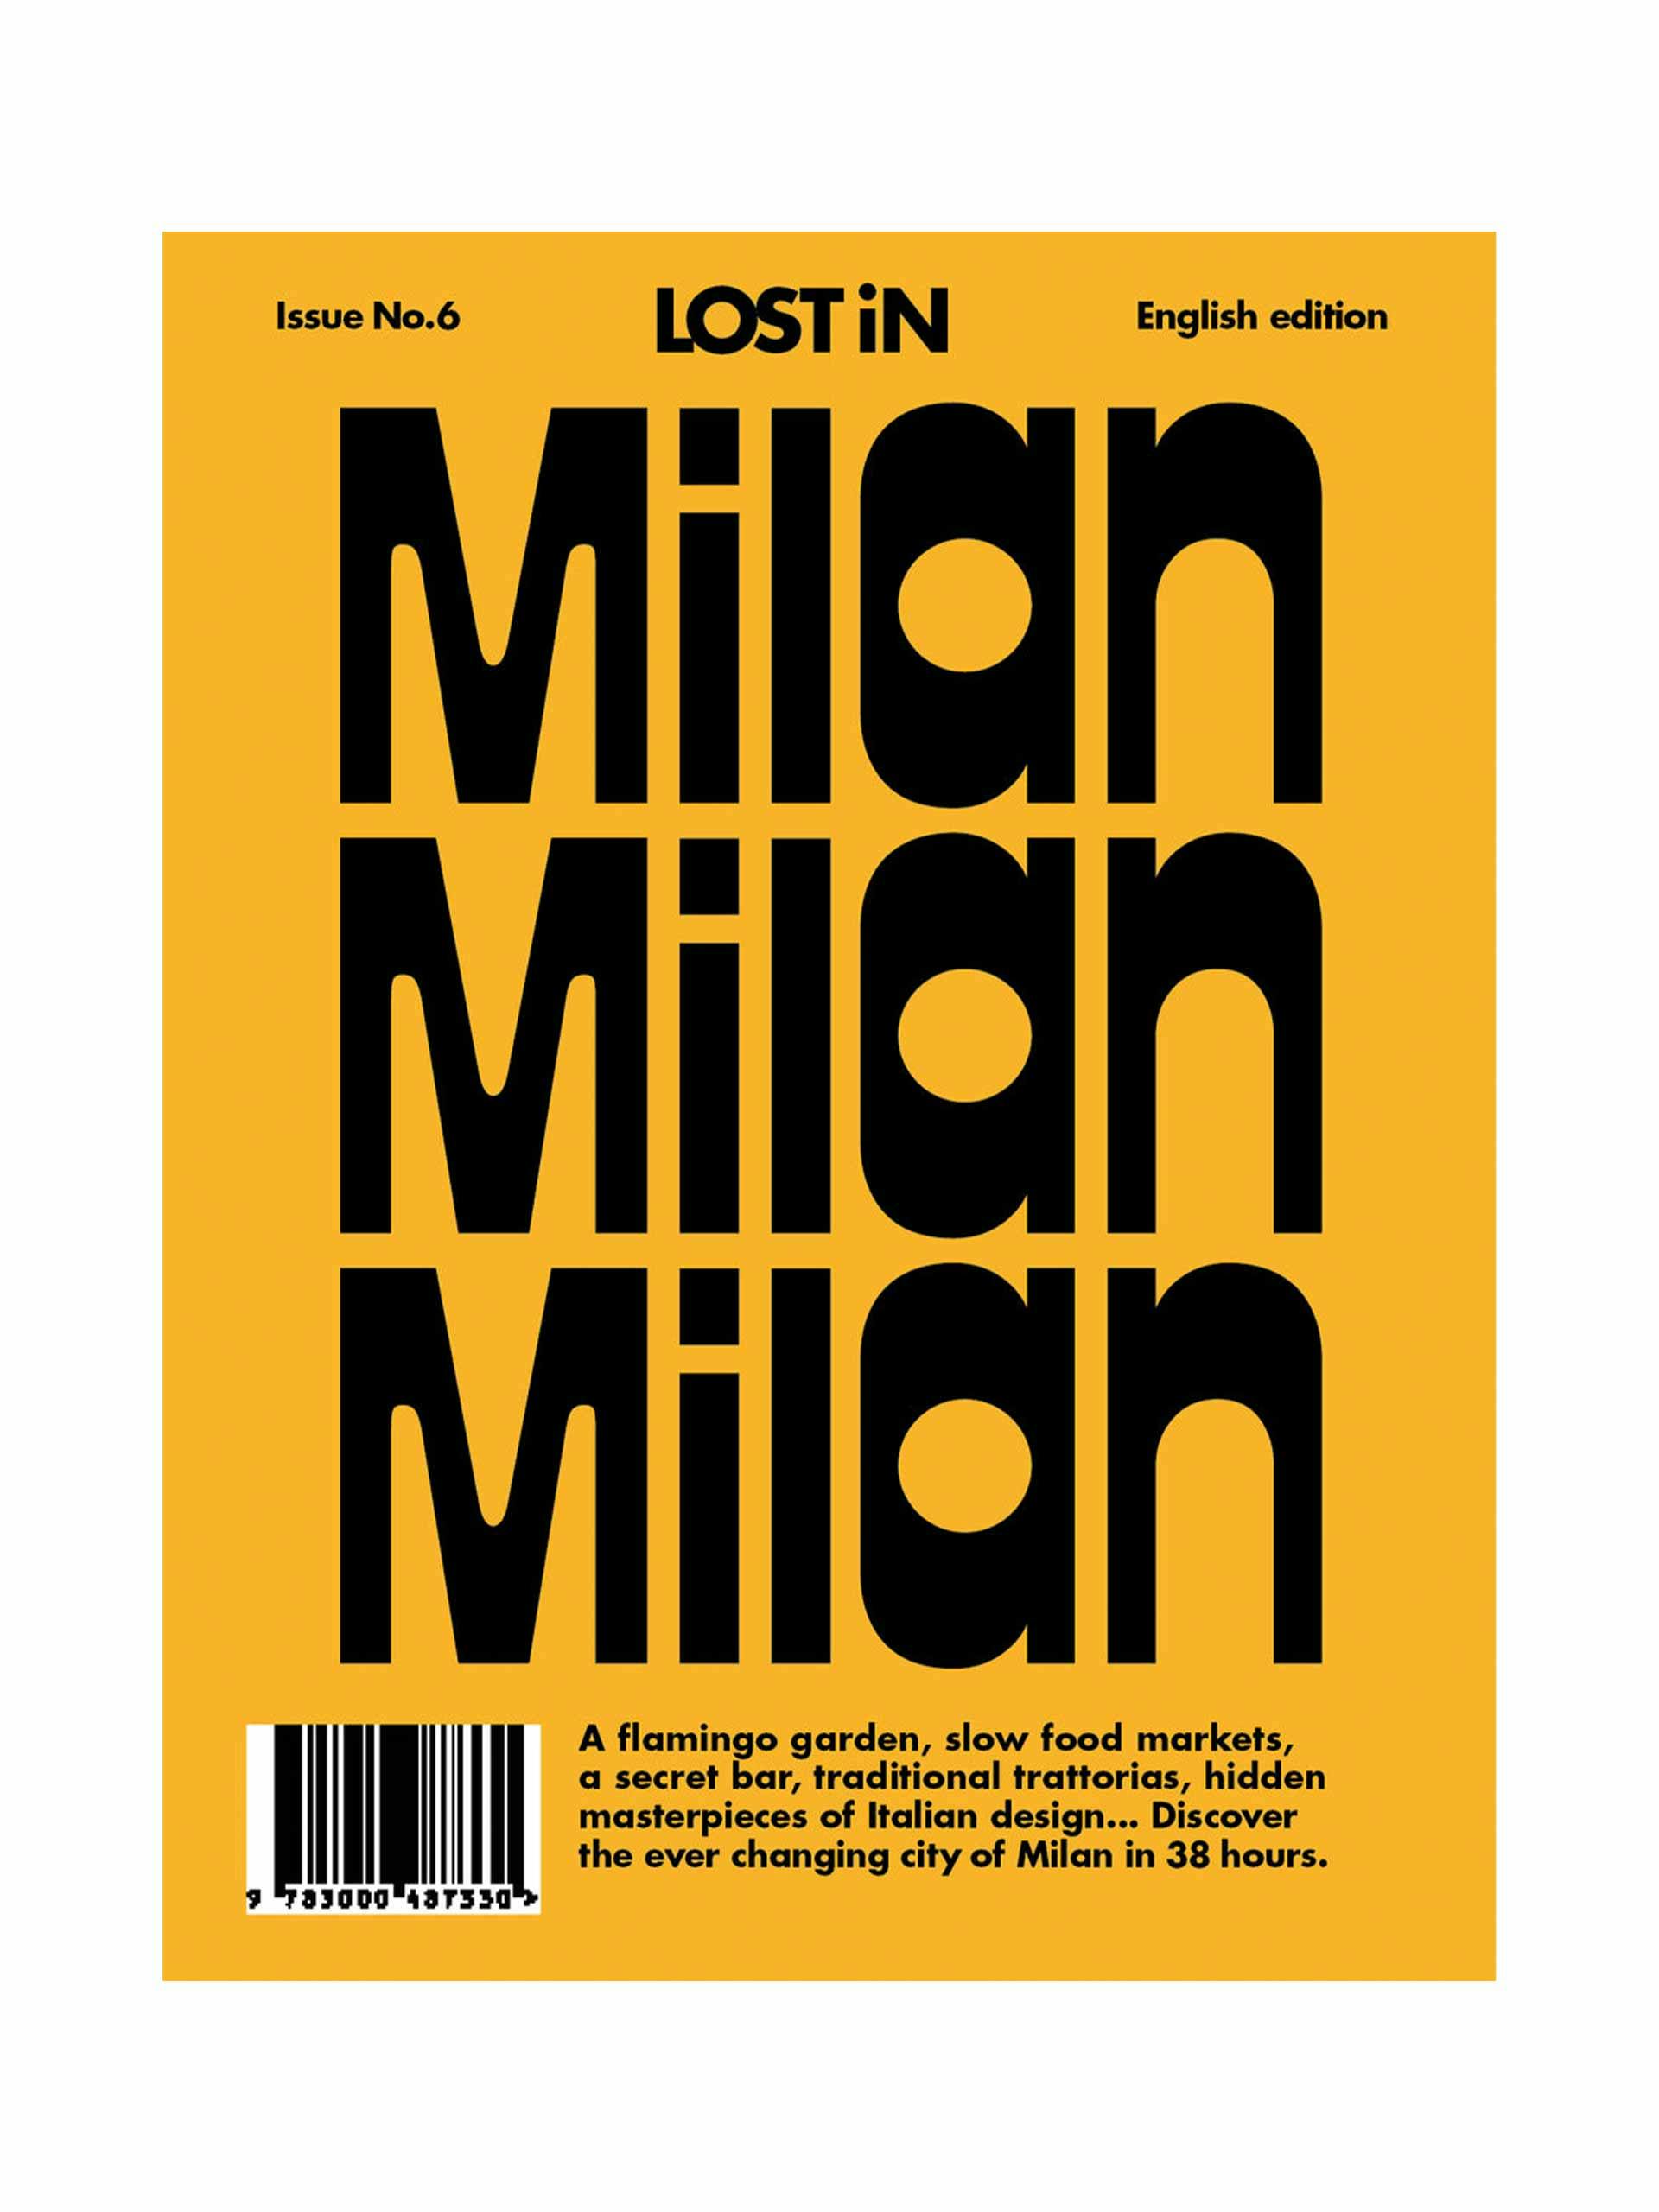 Lost in Milan